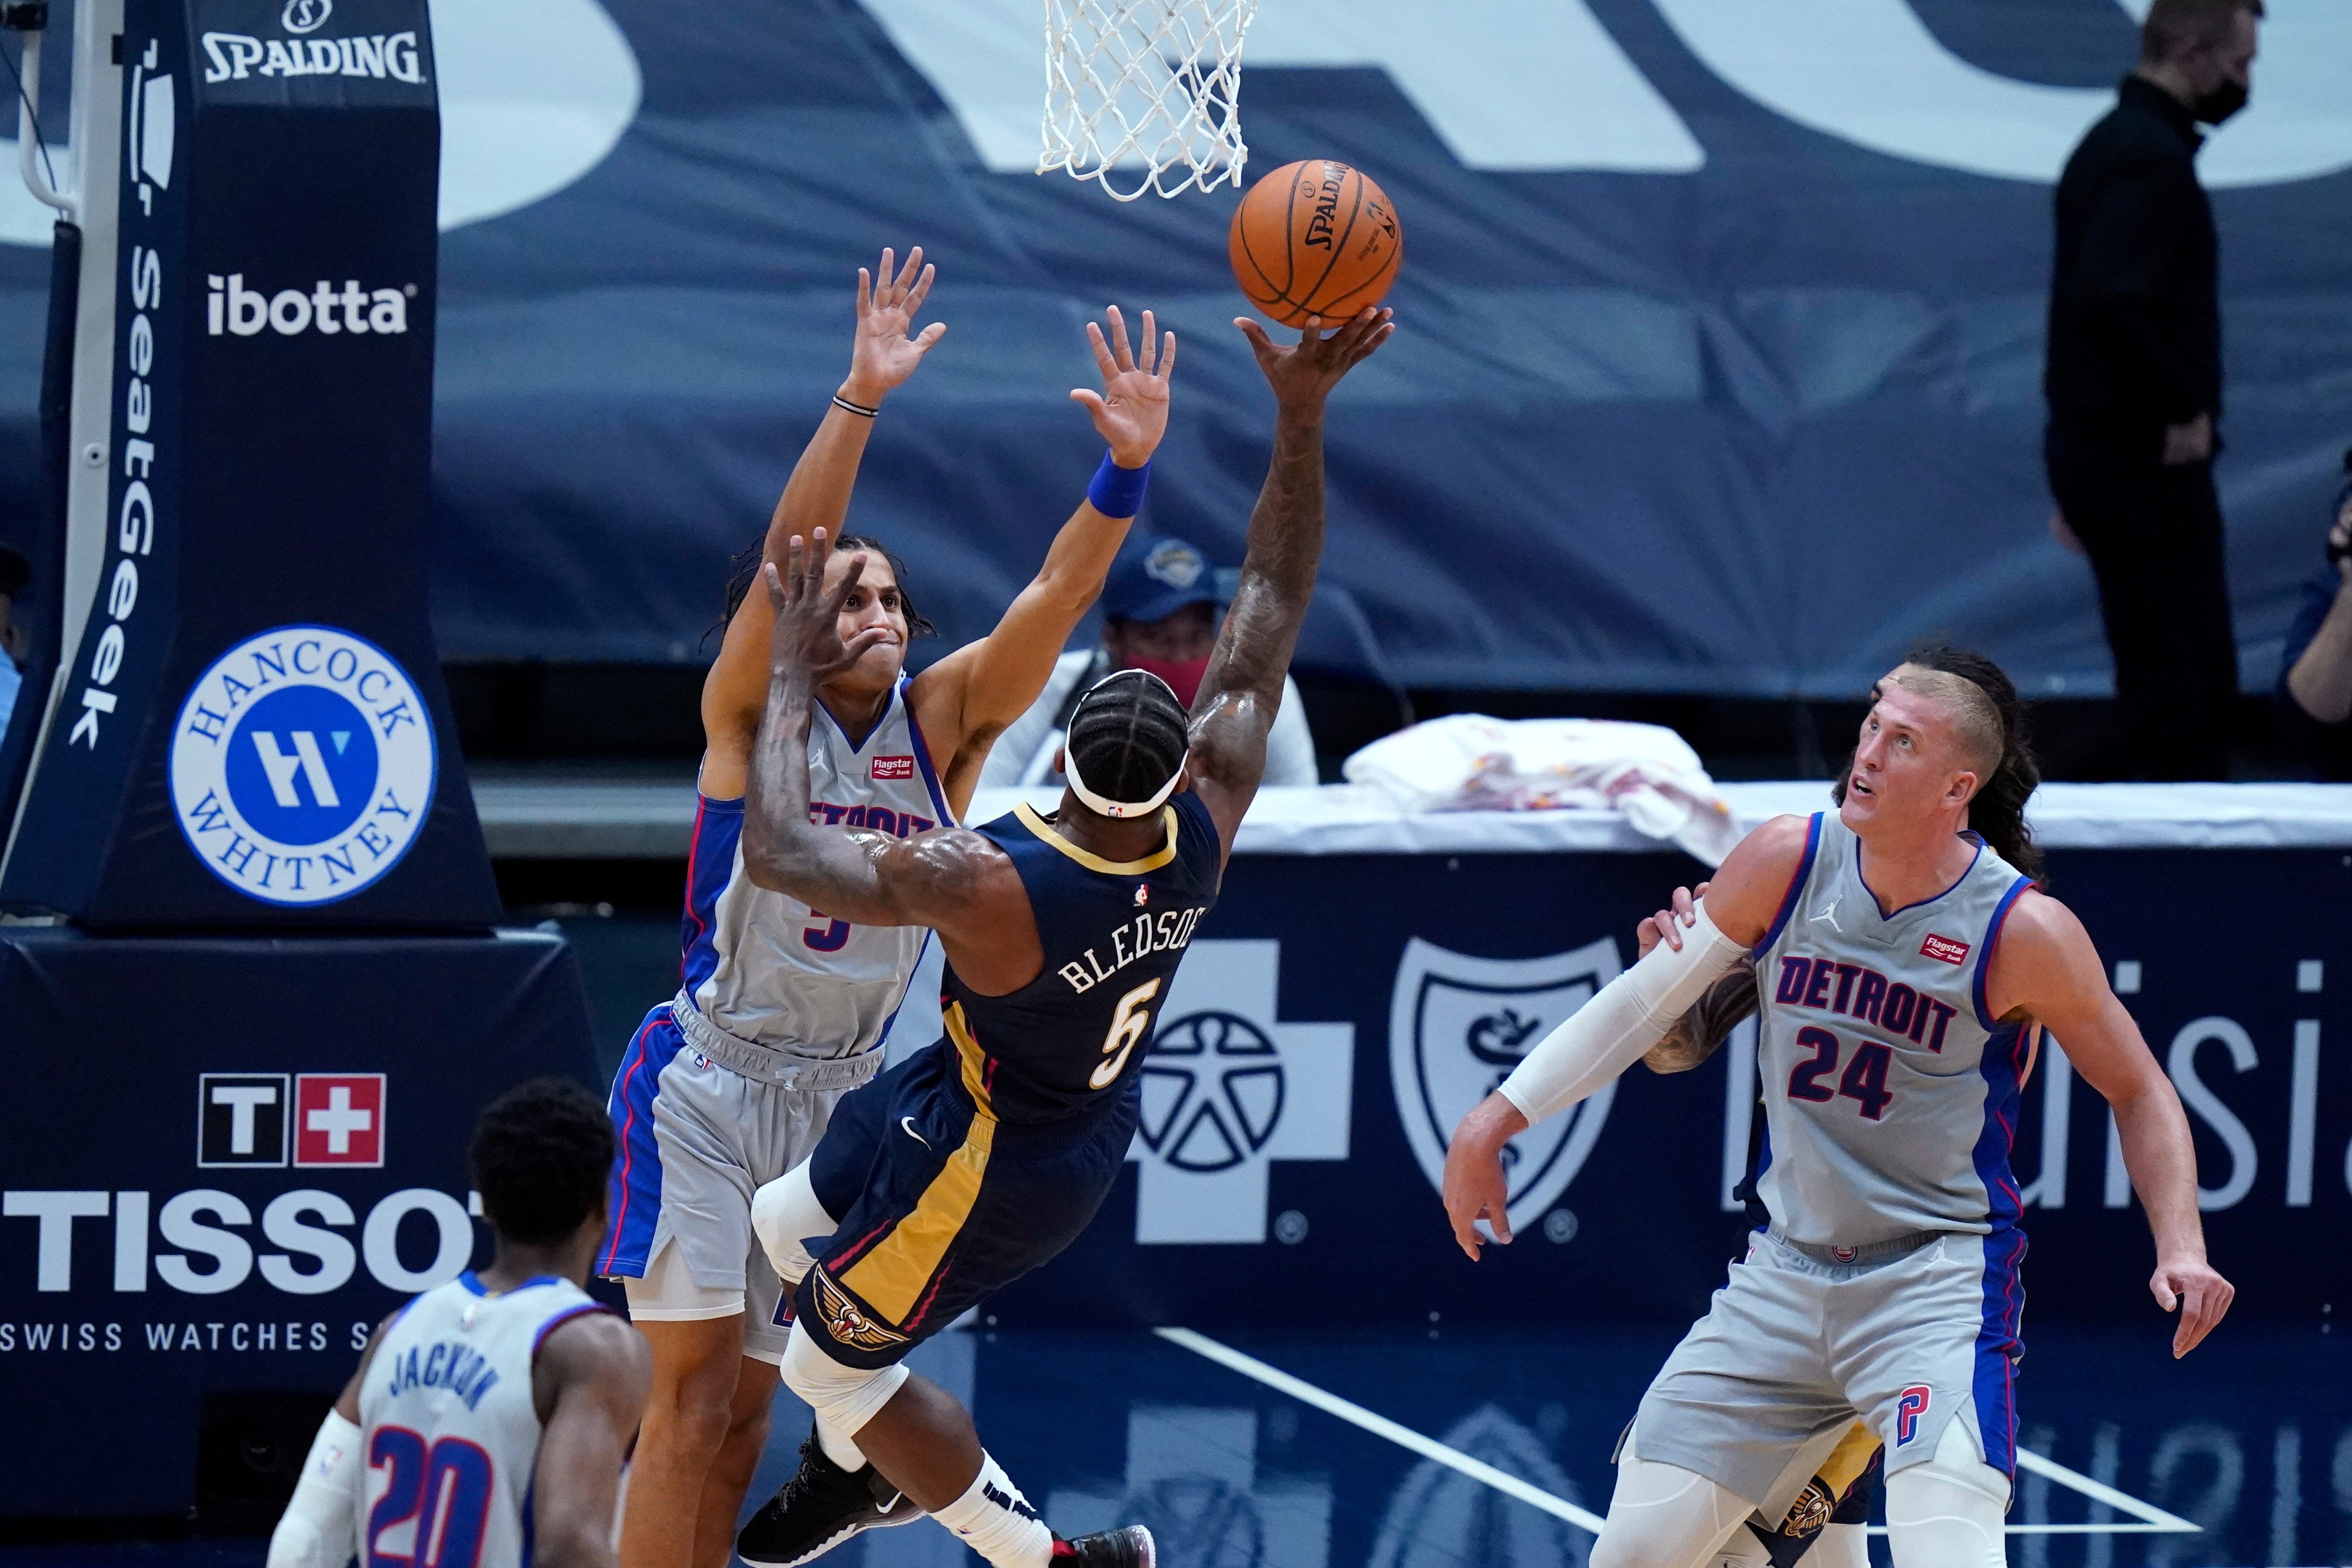 New Orleans Pelicans guard Eric Bledsoe shoots against Detroit Pistons guard Frank Jackson, top left, during the first half of an NBA basketball game in New Orleans, Wednesday, Feb. 24, 2021.